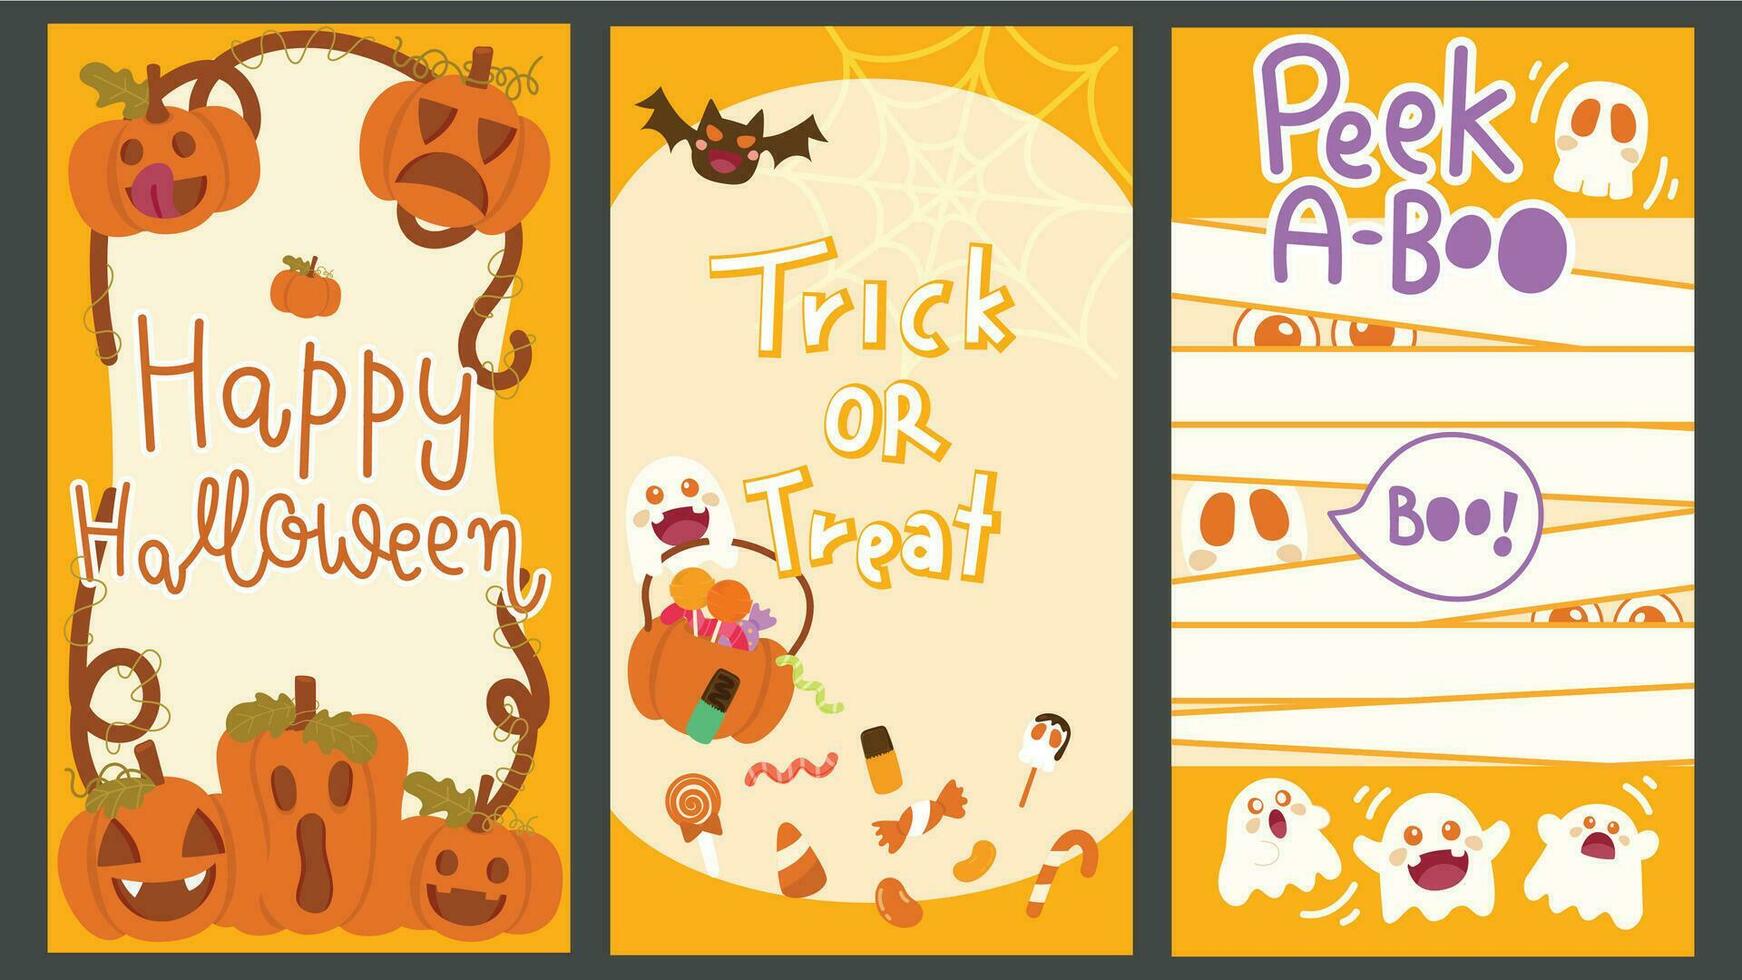 Greeting card Halloween day with text  Happy Halloween, Trick or Treat, Peek a boo. Orange card with Halloween Theme. vector